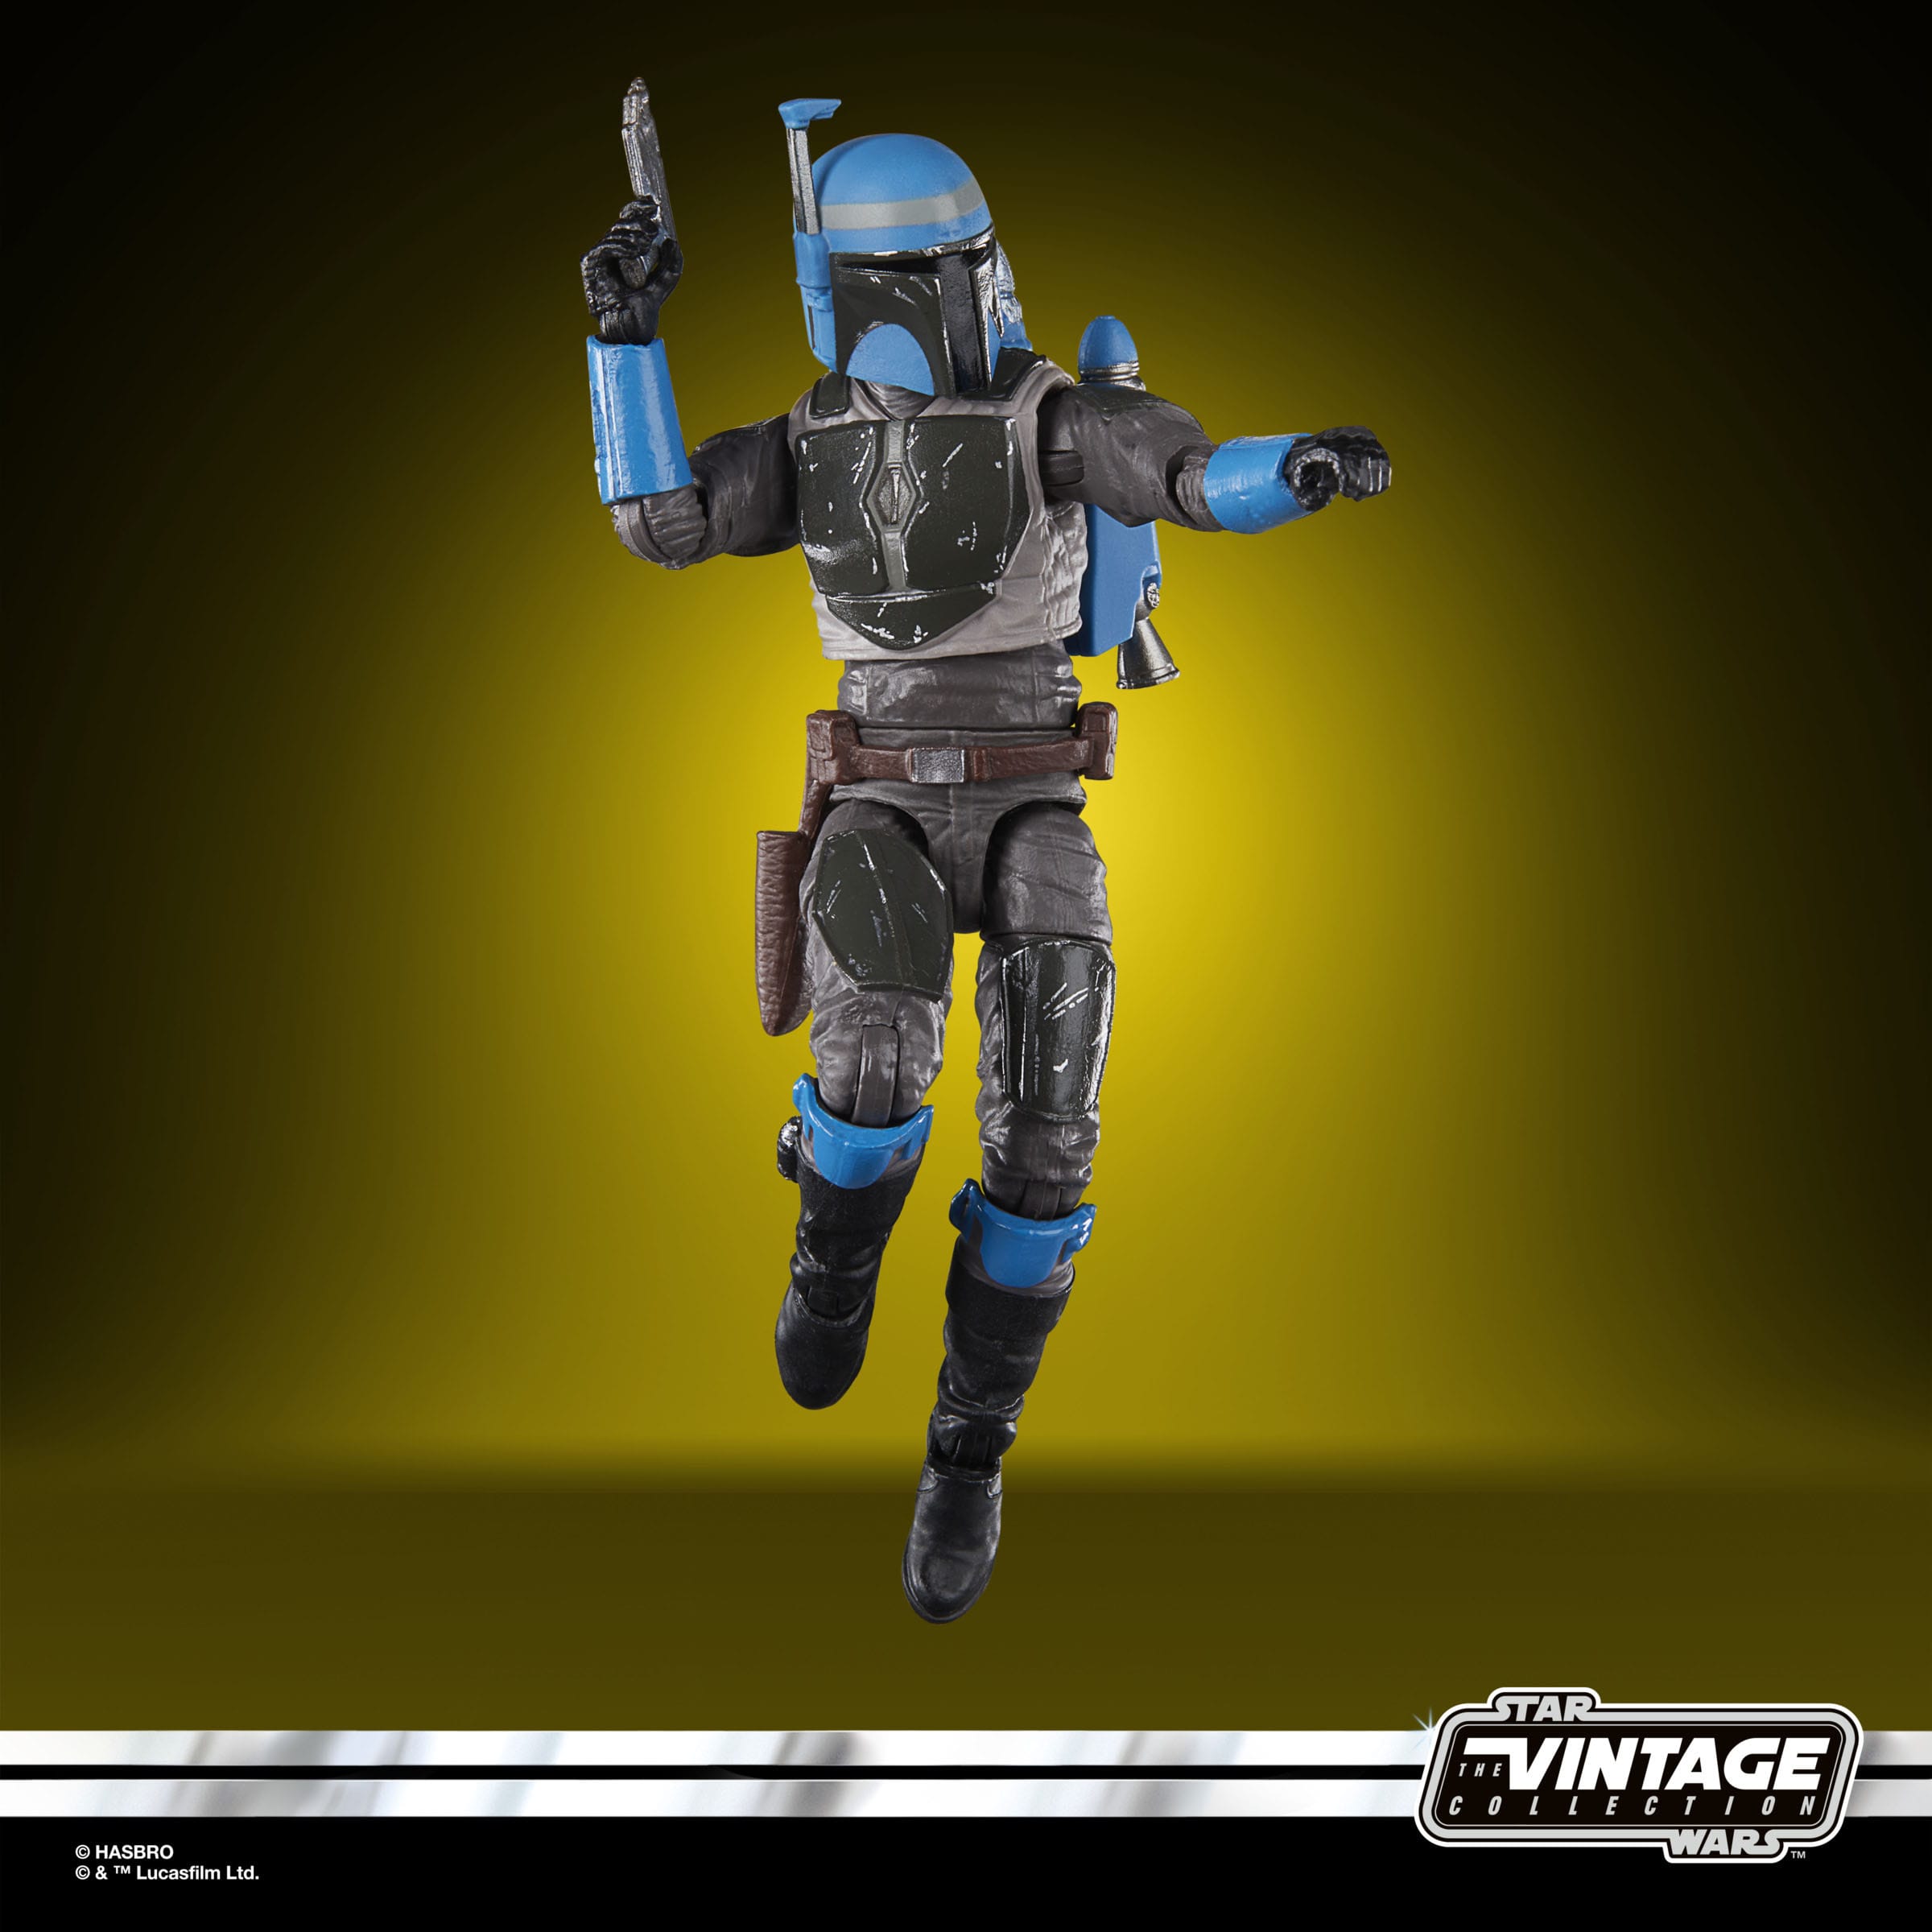 Star Wars: The Mandalorian Vintage Collection Actionfigur Axe Woves (Privateer) 10 cm HASF9783 5010996218643